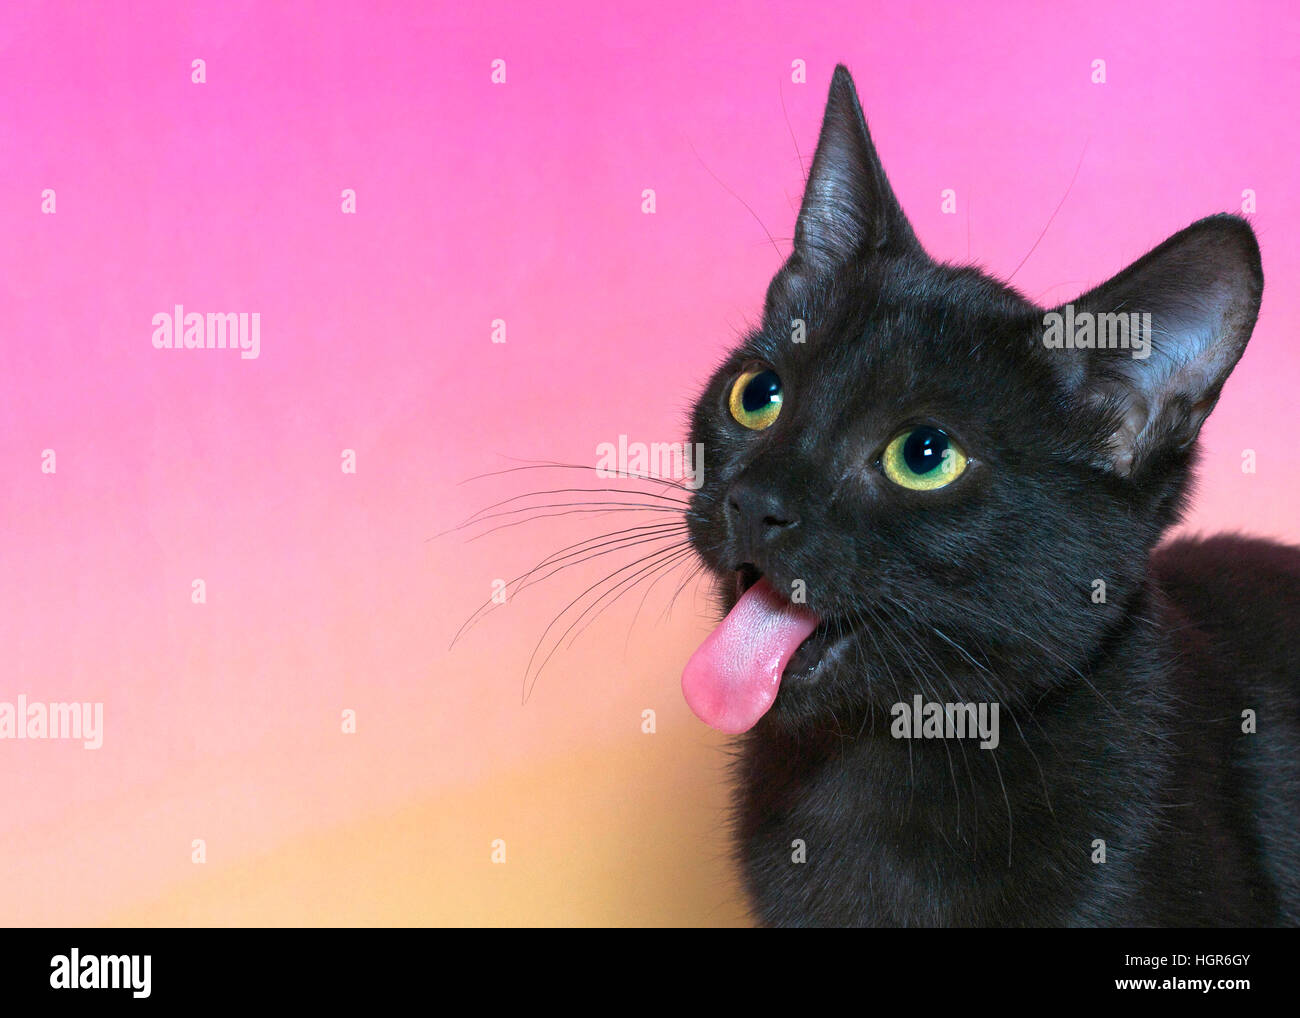 Portrait of a black domestic short hair kitten with yellow green eyes isolated on a mottled pink and yellow background. Tongue sticking straight out. Stock Photo